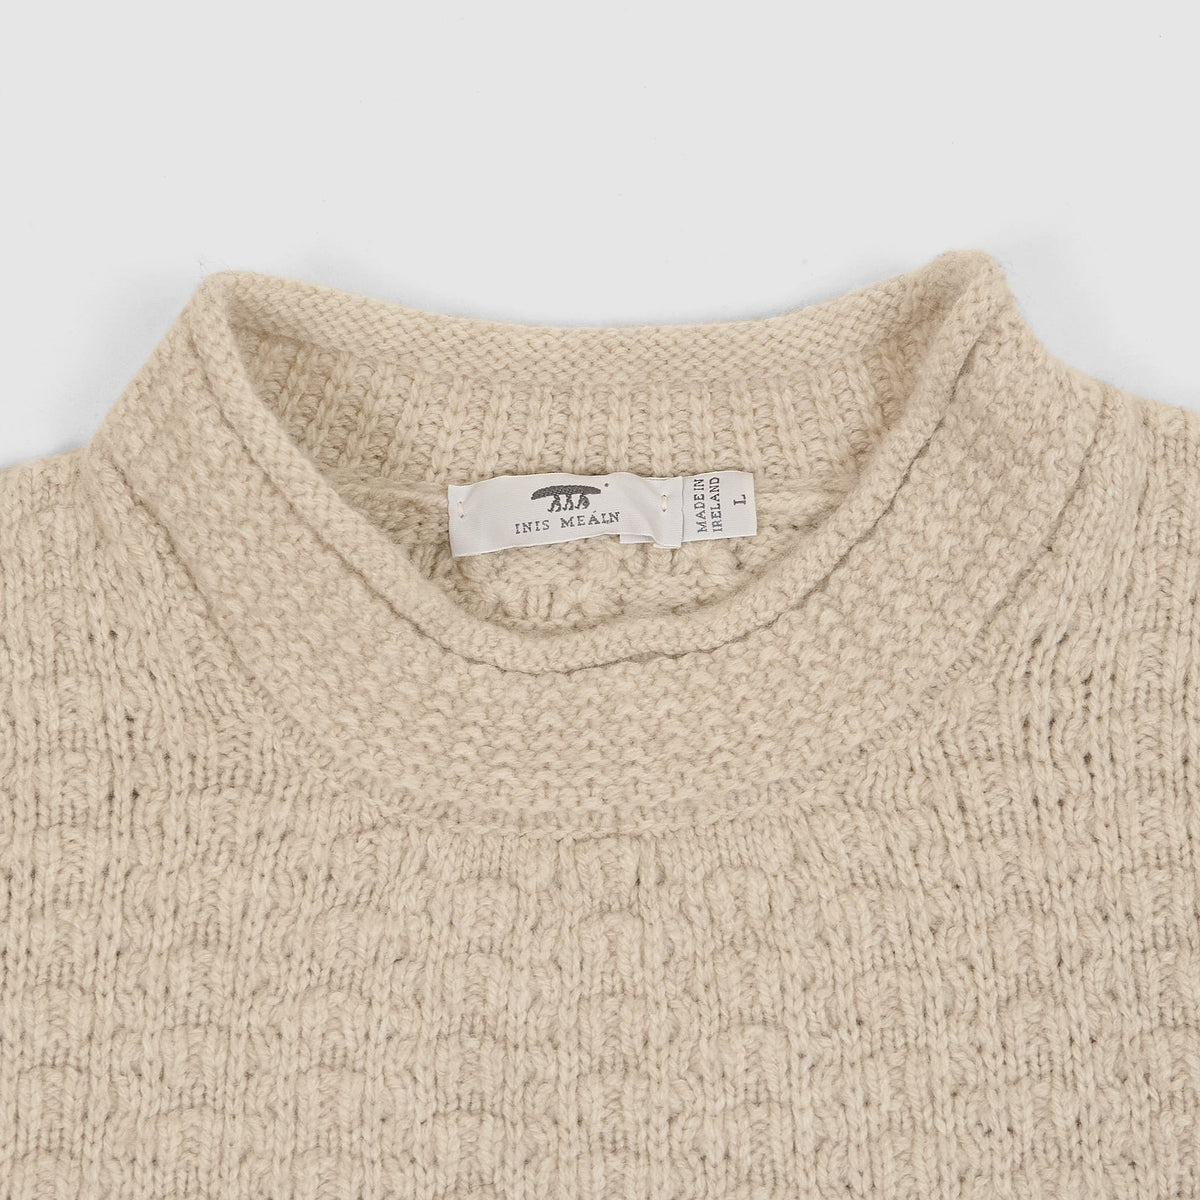 Inis Meáin Stand-up Crew Neck Wool Jumper